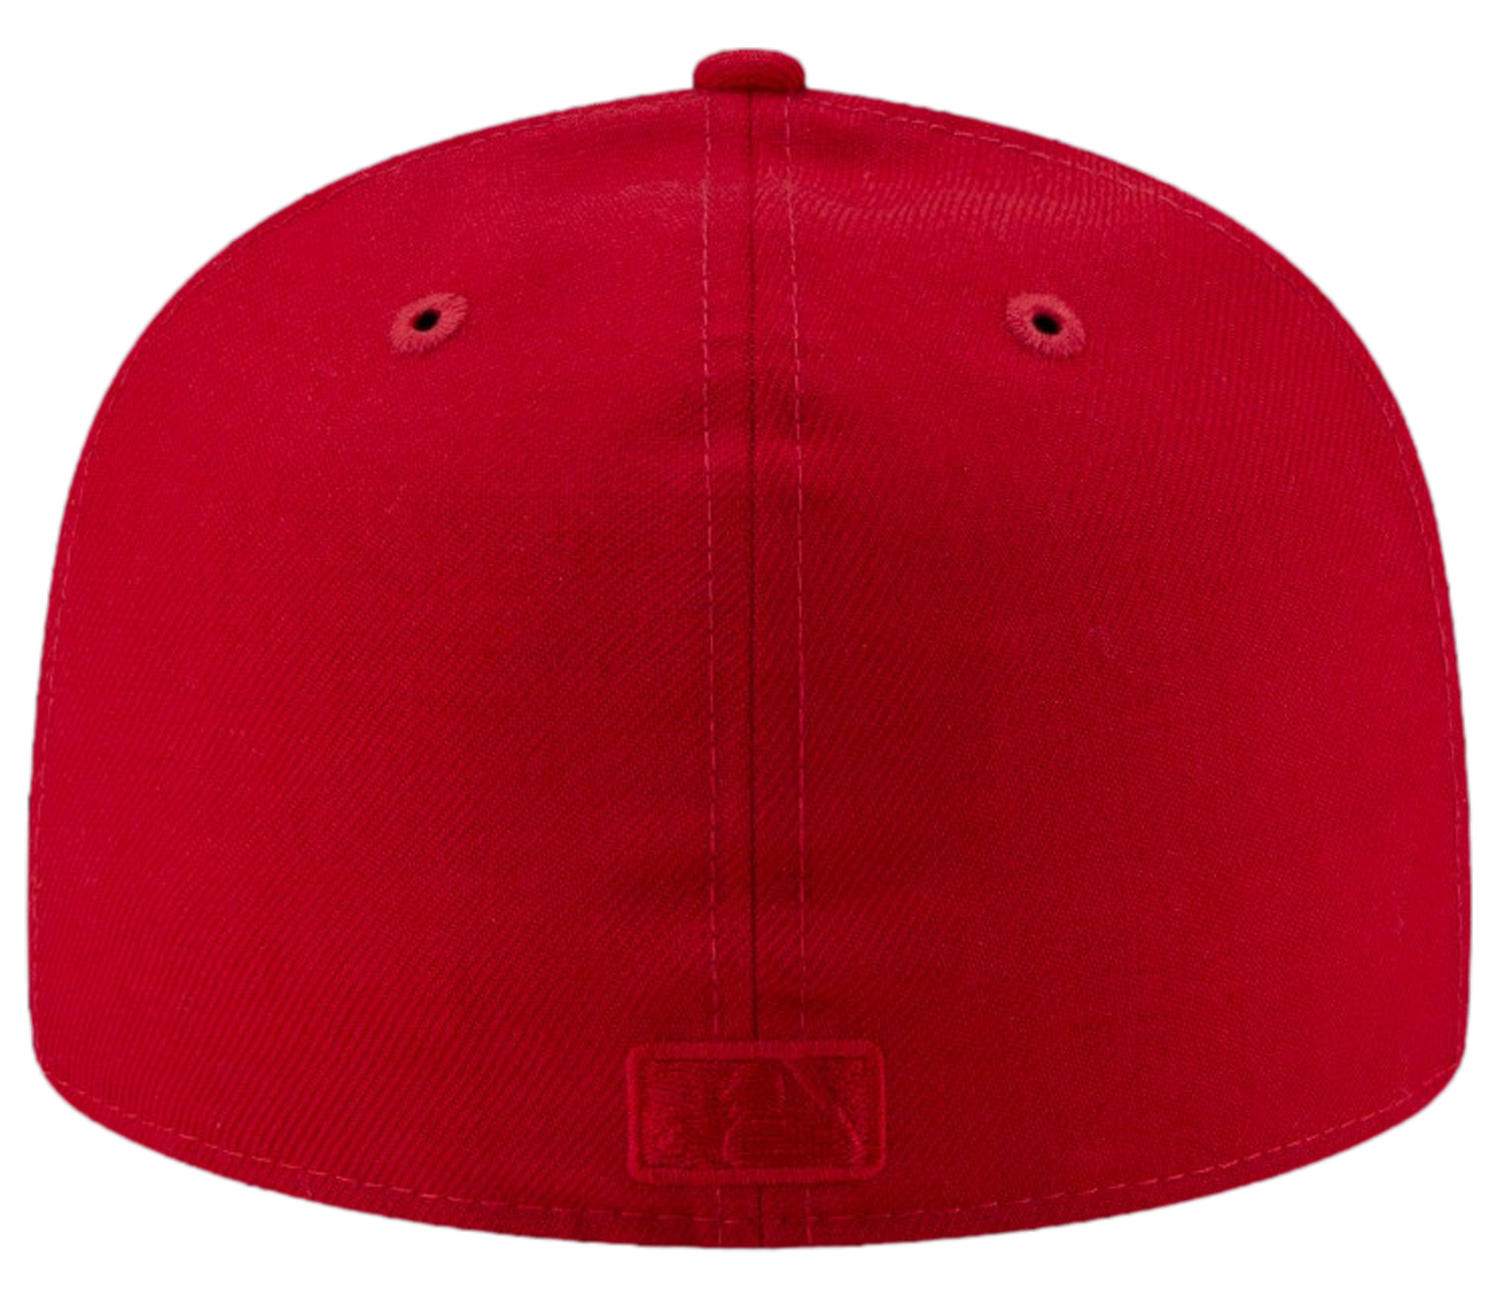 fear-of-god-new-era-59fifty-fitted-cap-colorblock-red-white-3